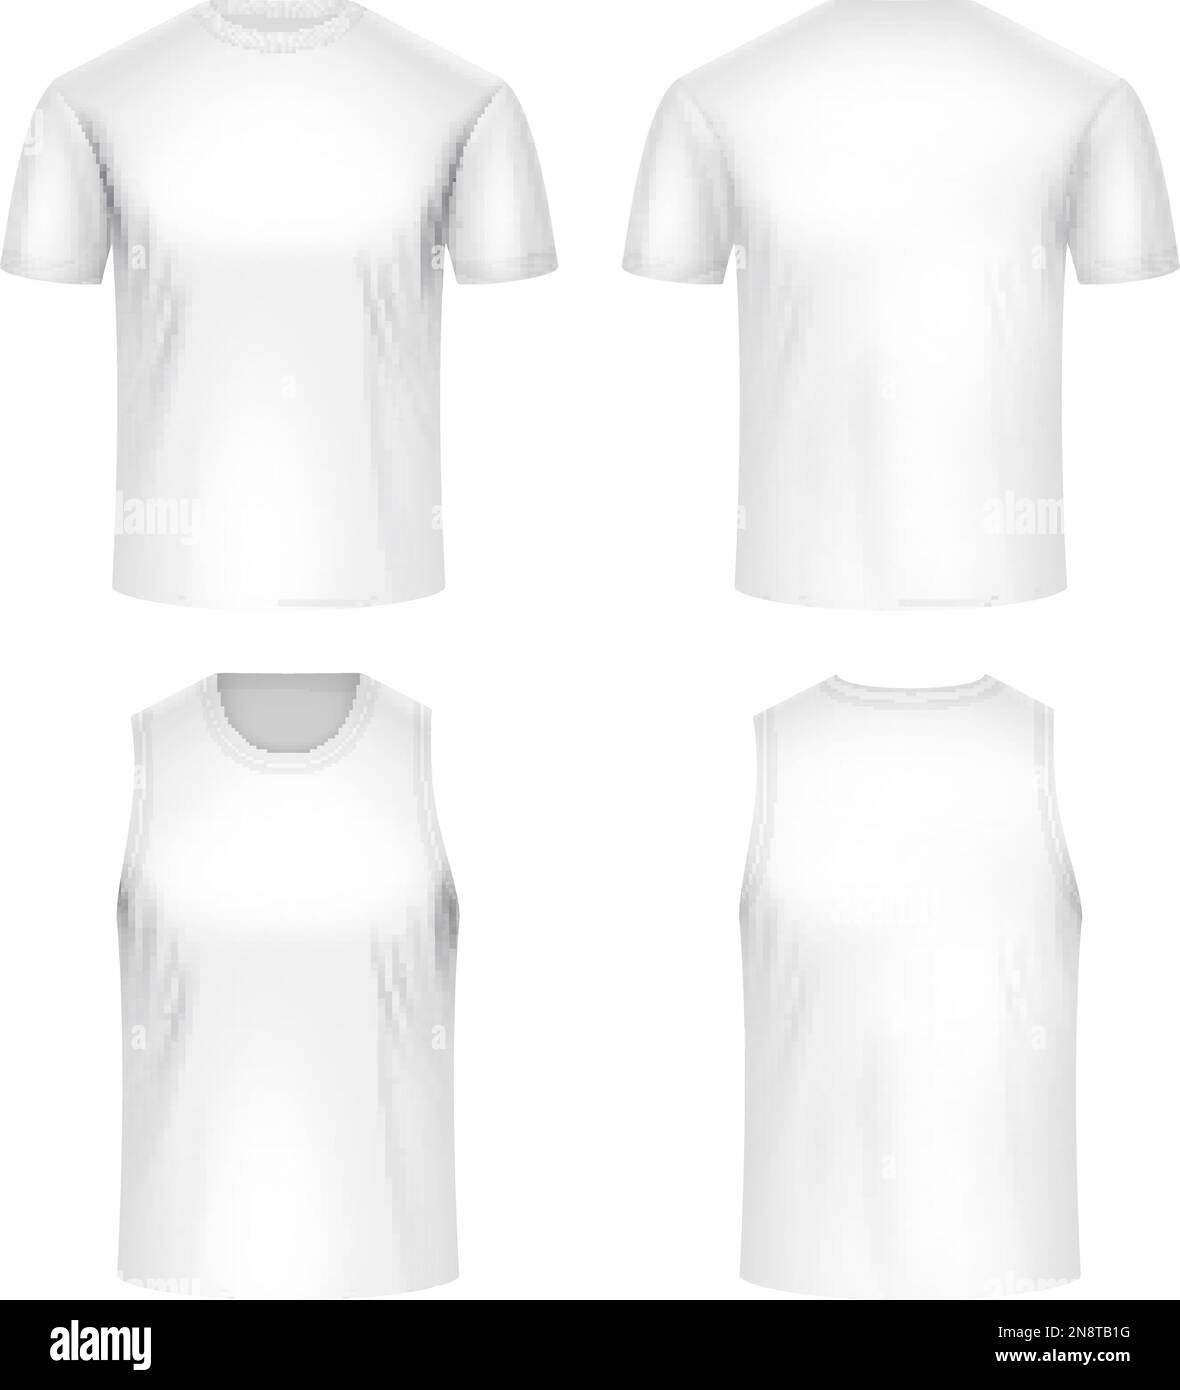 White And Black Tshirt Mockup Sport Blank Shirt Template Front And